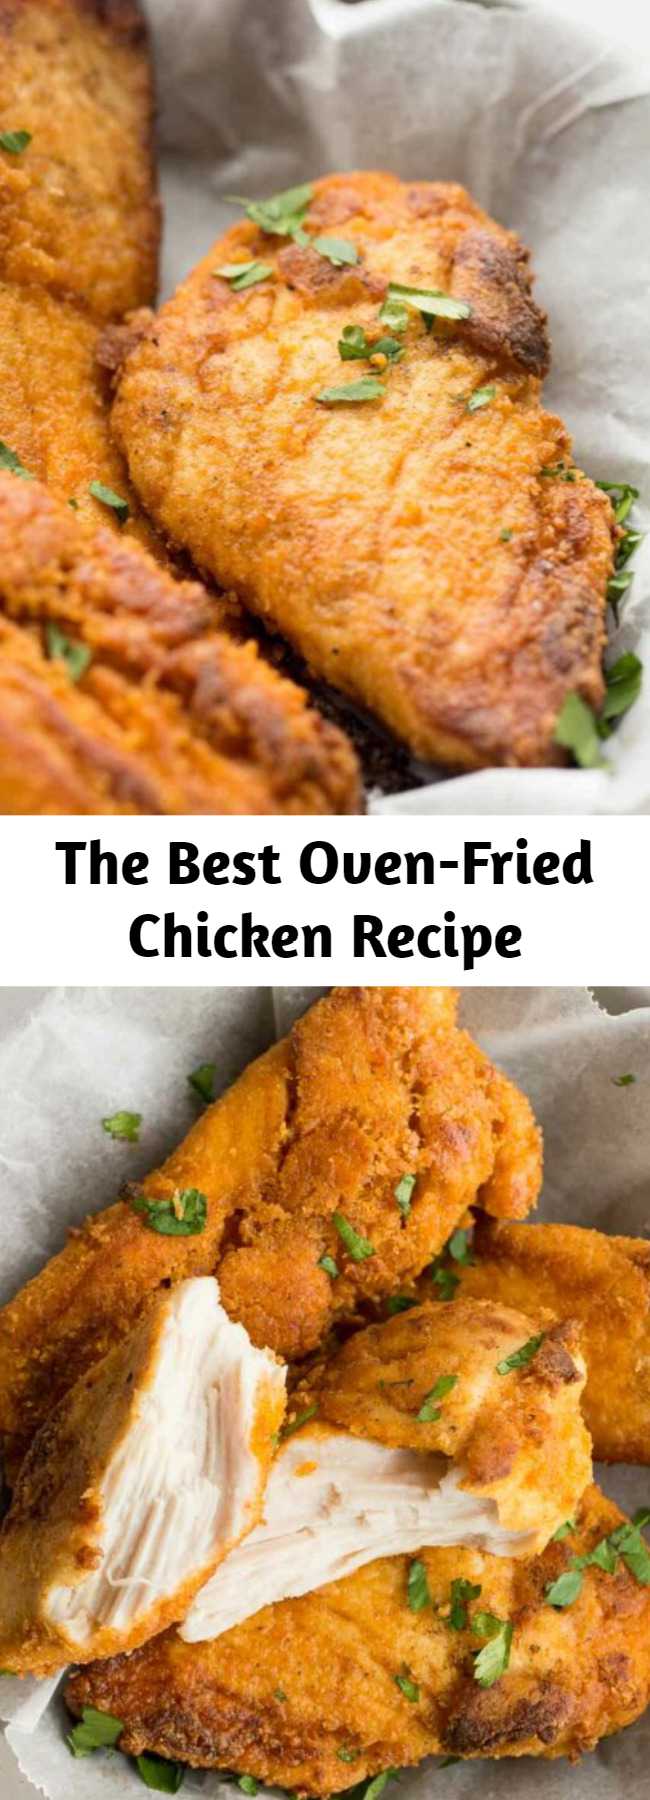 The Best Oven-Fried Chicken Recipe - This is the BEST Oven Fried Chicken recipe! It comes crispy right out of the oven, is much lower in fat and made with lean chicken breast. It takes just like KFC but it’s baked instead of fried! #chicken #healthy #healthydiet #healthyrecipe #chickenrecipe #recipe #cooking #dinner